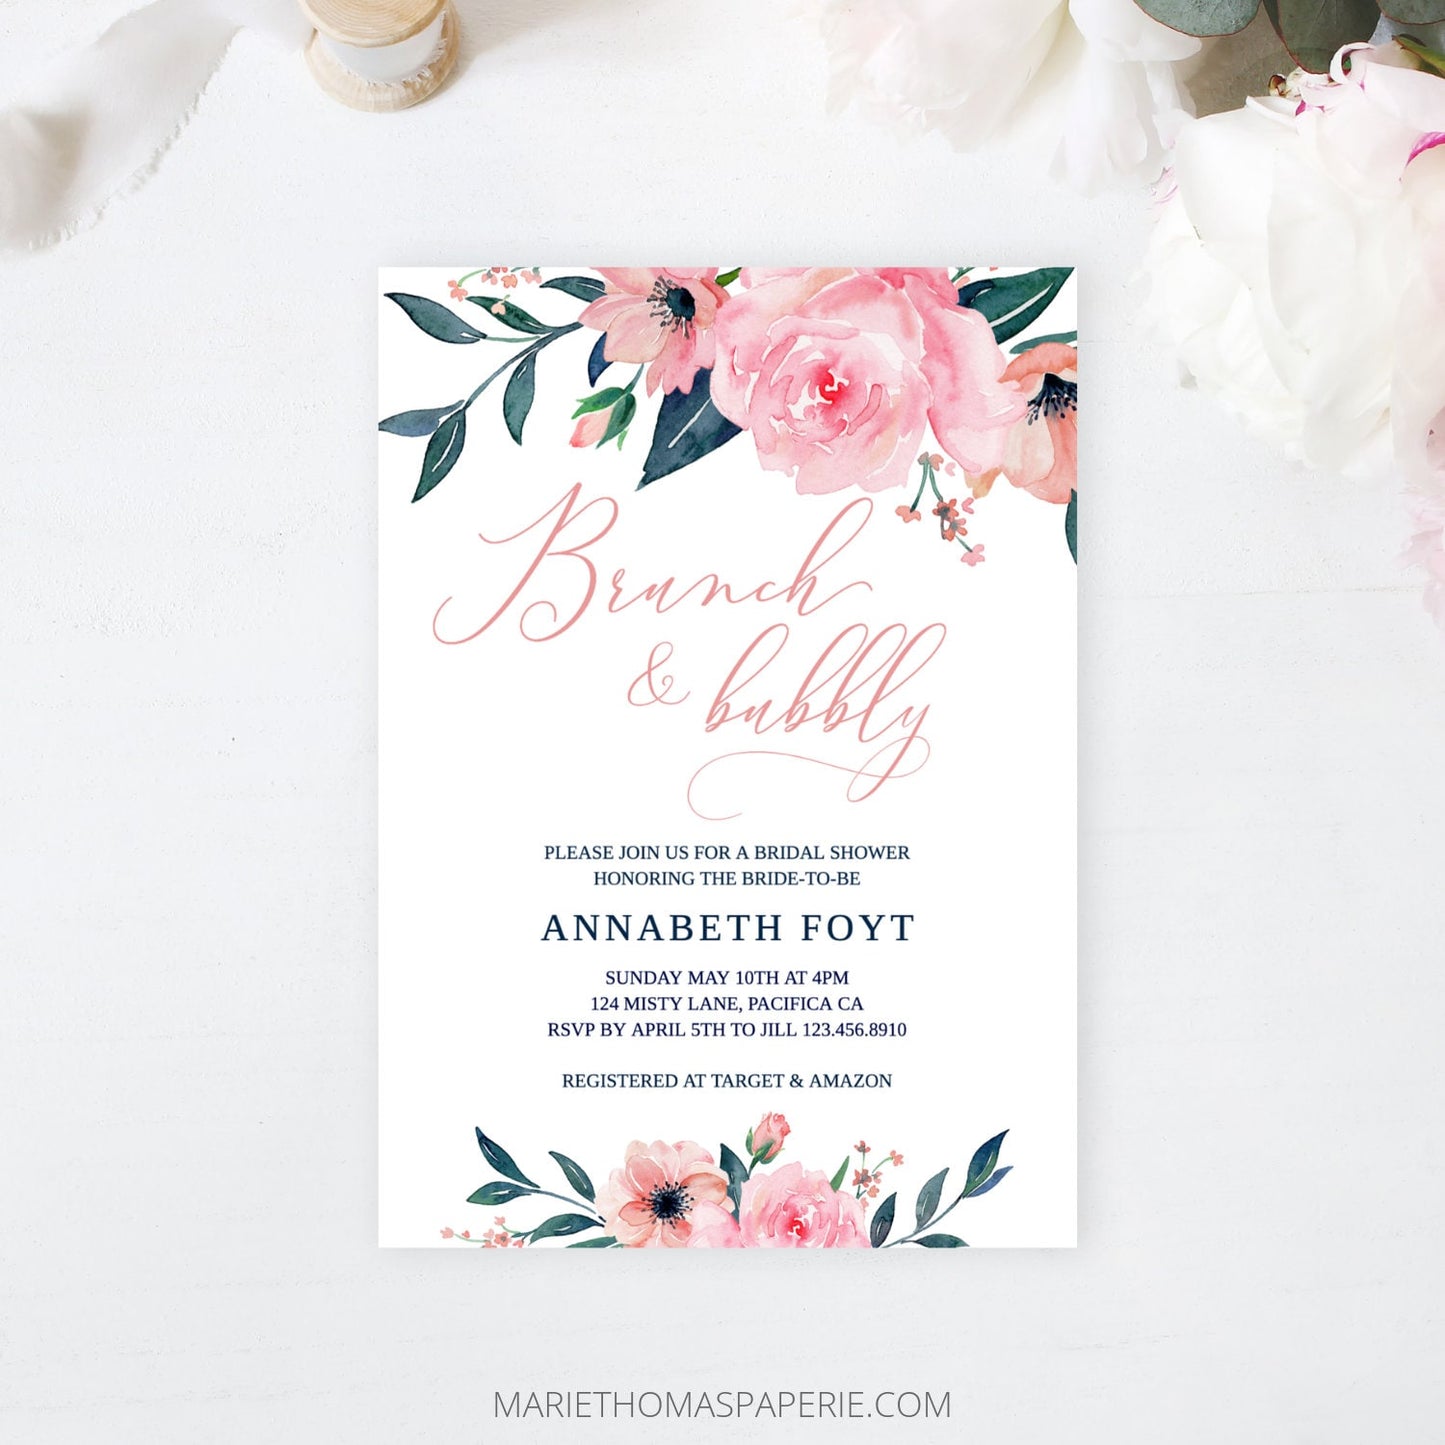 Editable Brunch and Bubbly Bridal Shower Invitation Pink & Navy Floral Boho Bridal Shower Invite Template